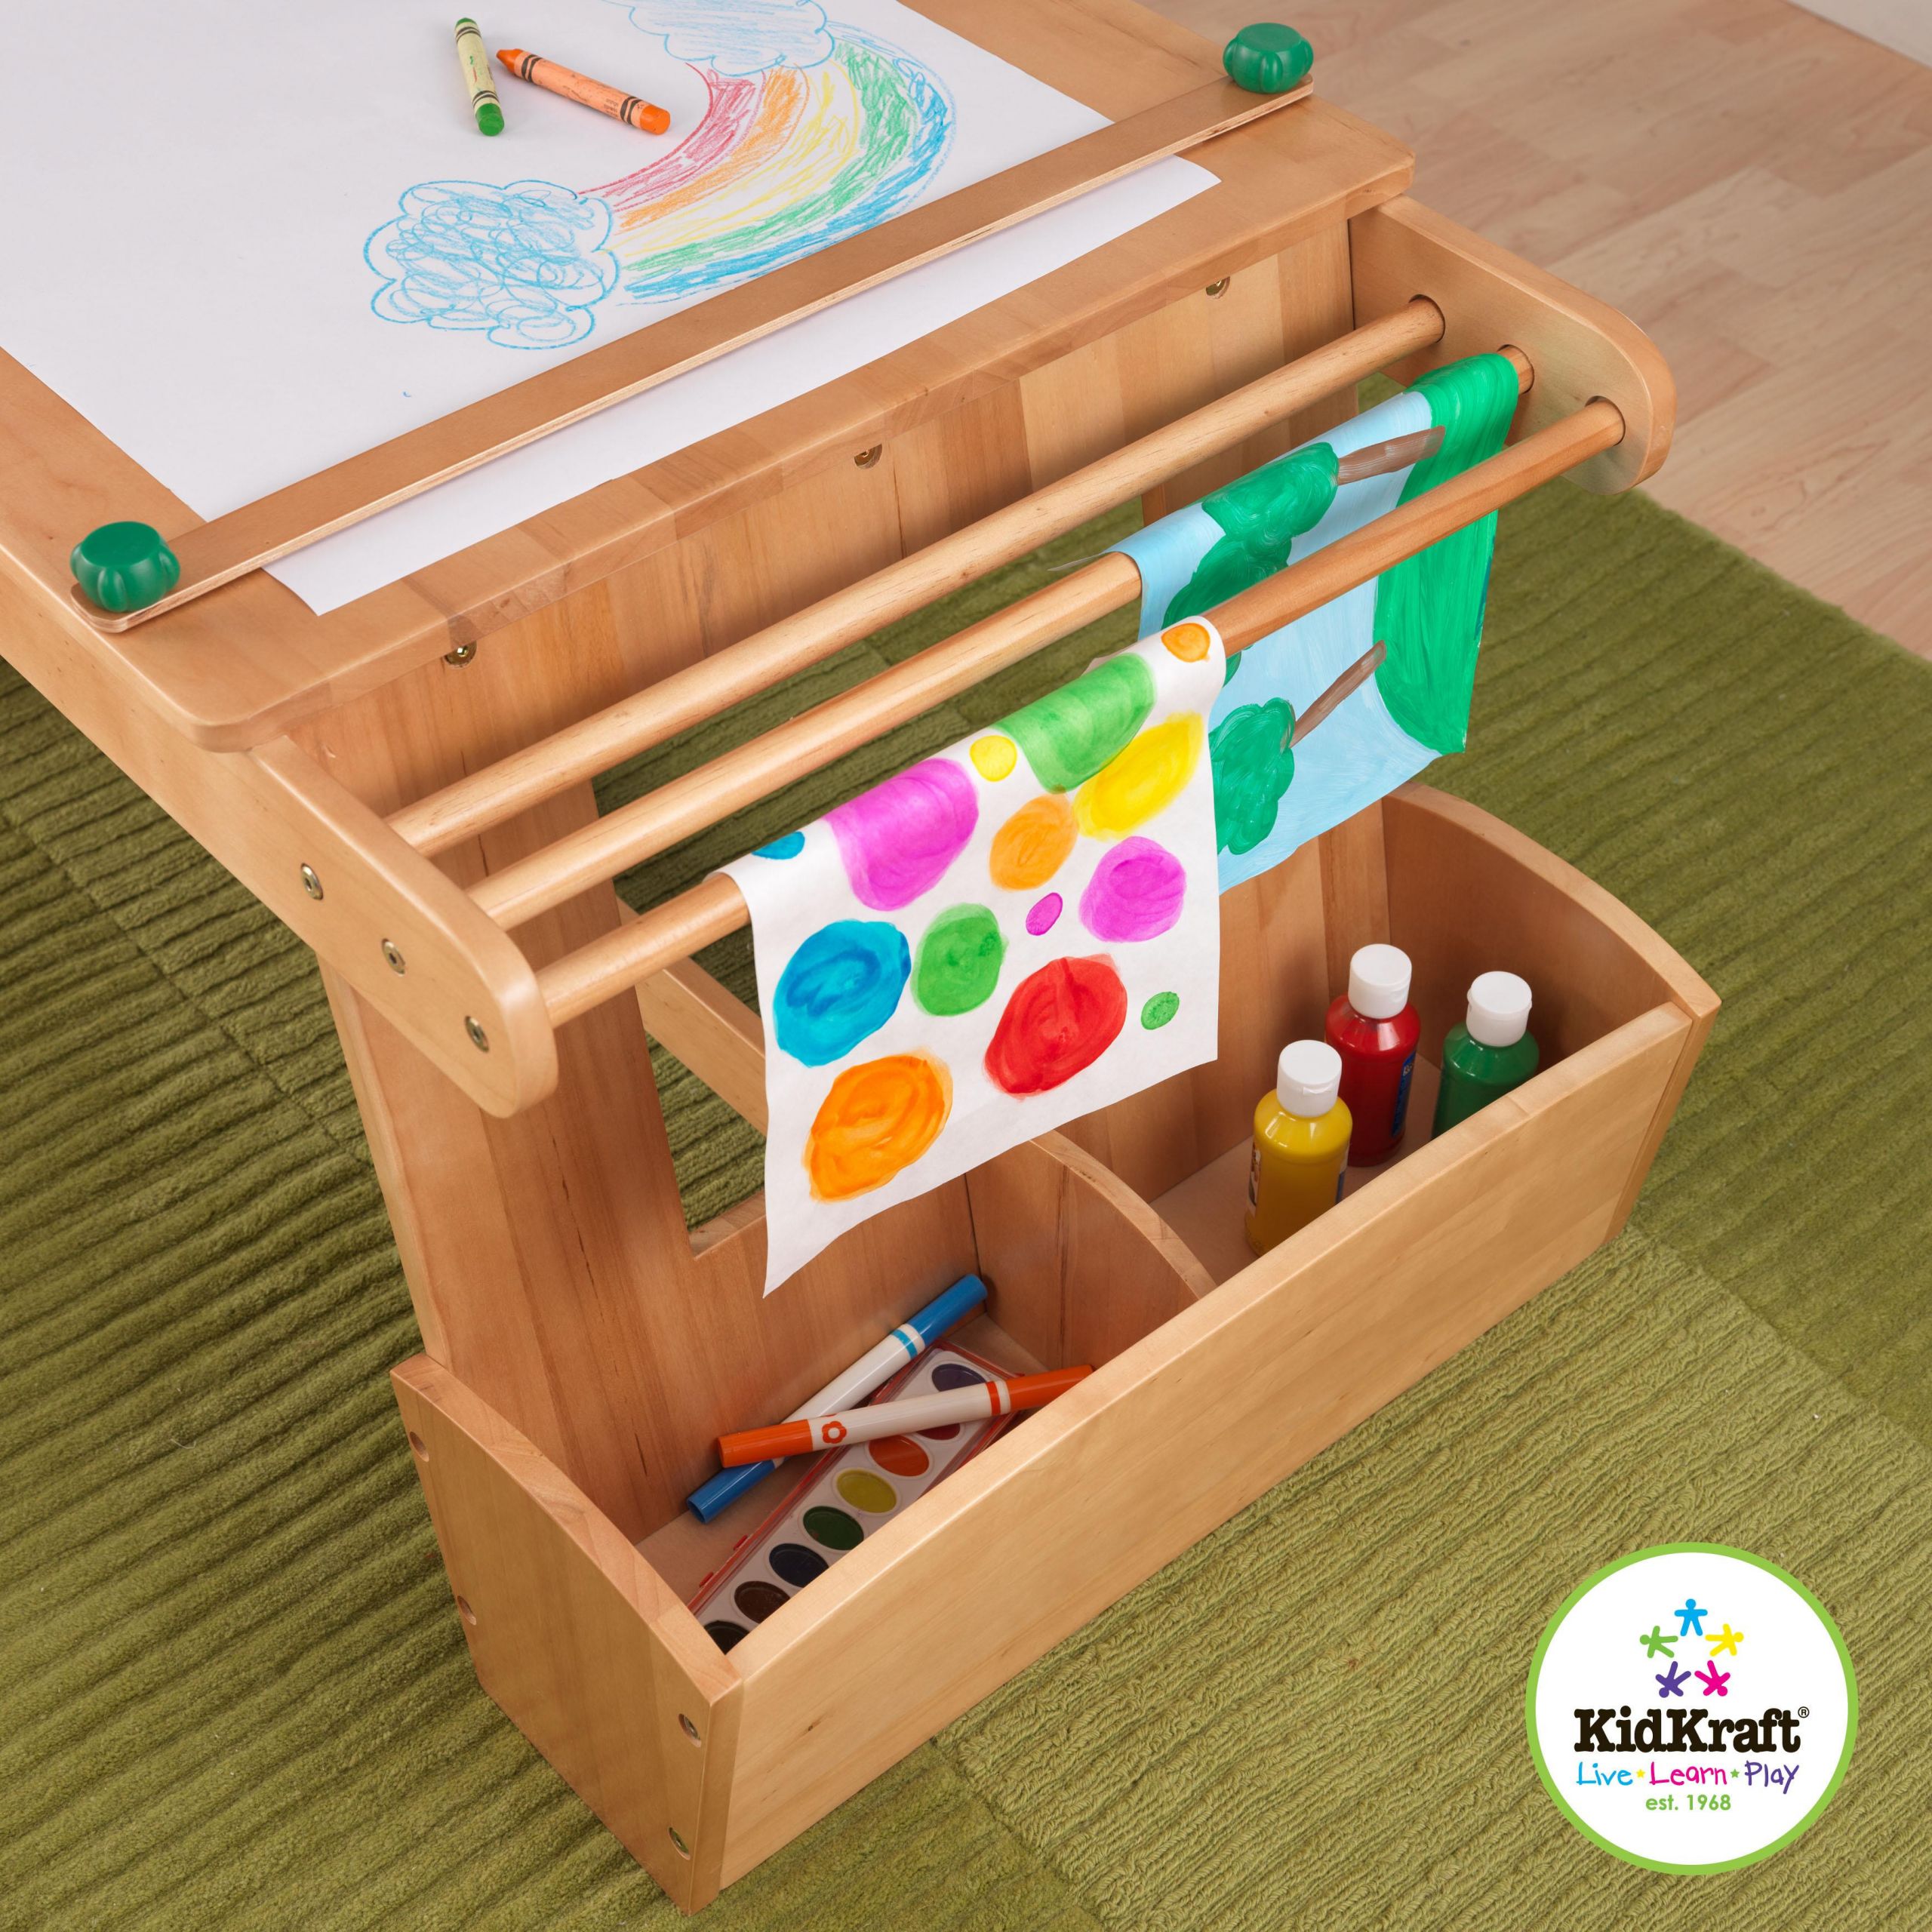 Kids Art Table With Storage
 KidKraft Art Table With Drying Rack And Storage by OJ